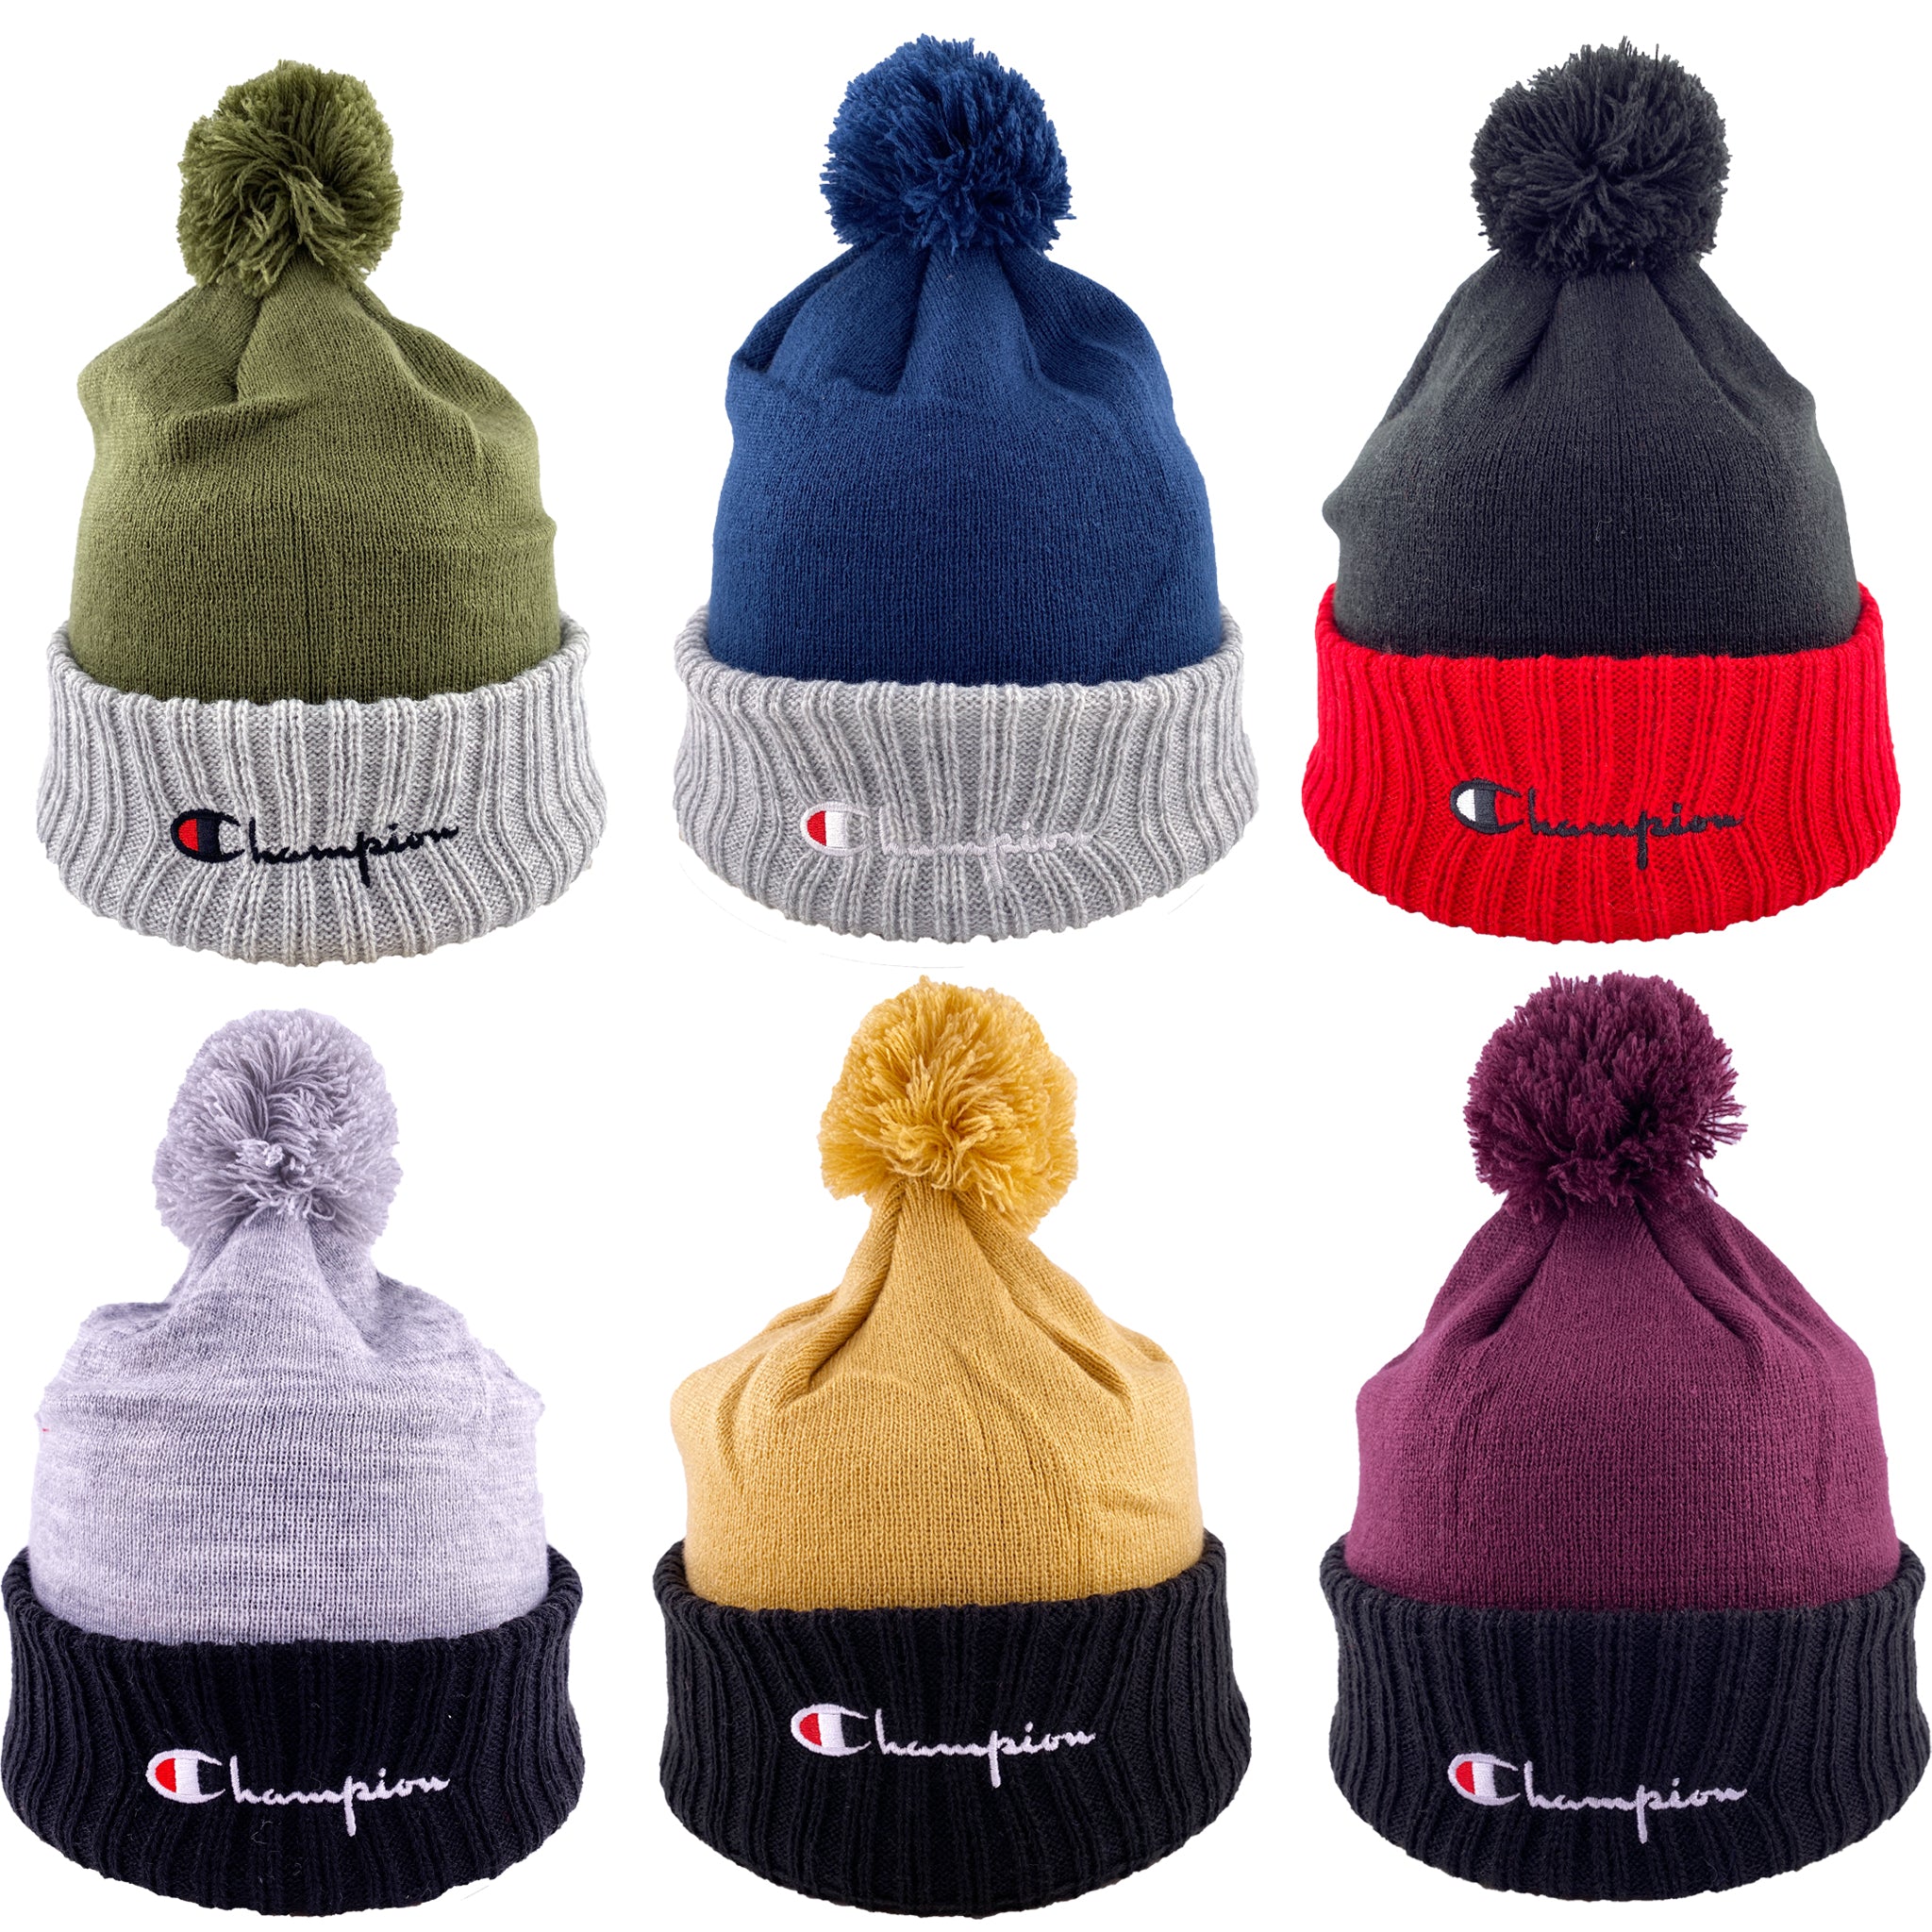 Beanie Champion That Store – with More Men\'s Shoe Pom and